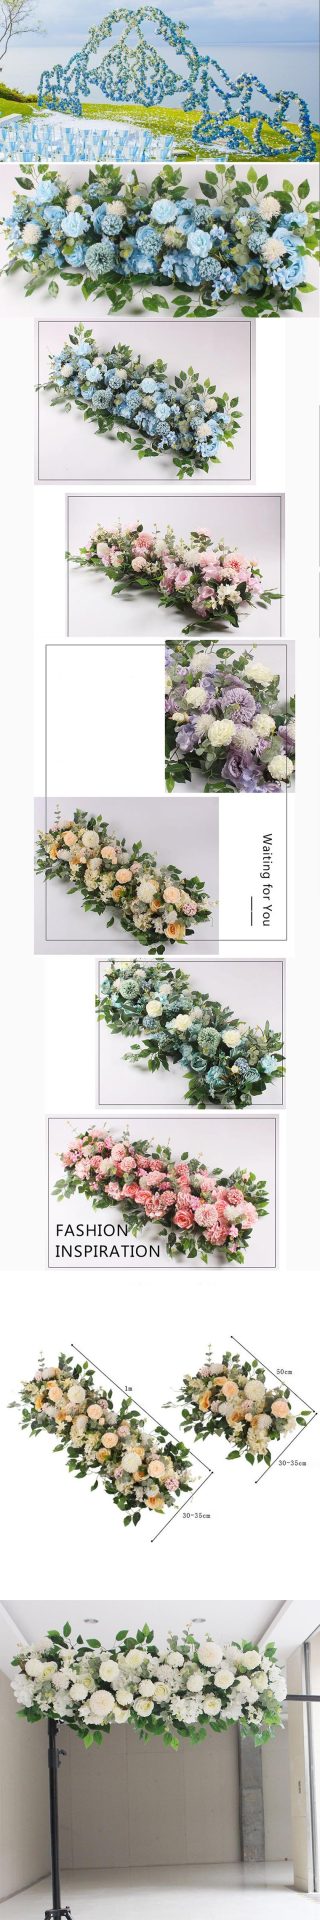 Artificial Flowers For Decoration